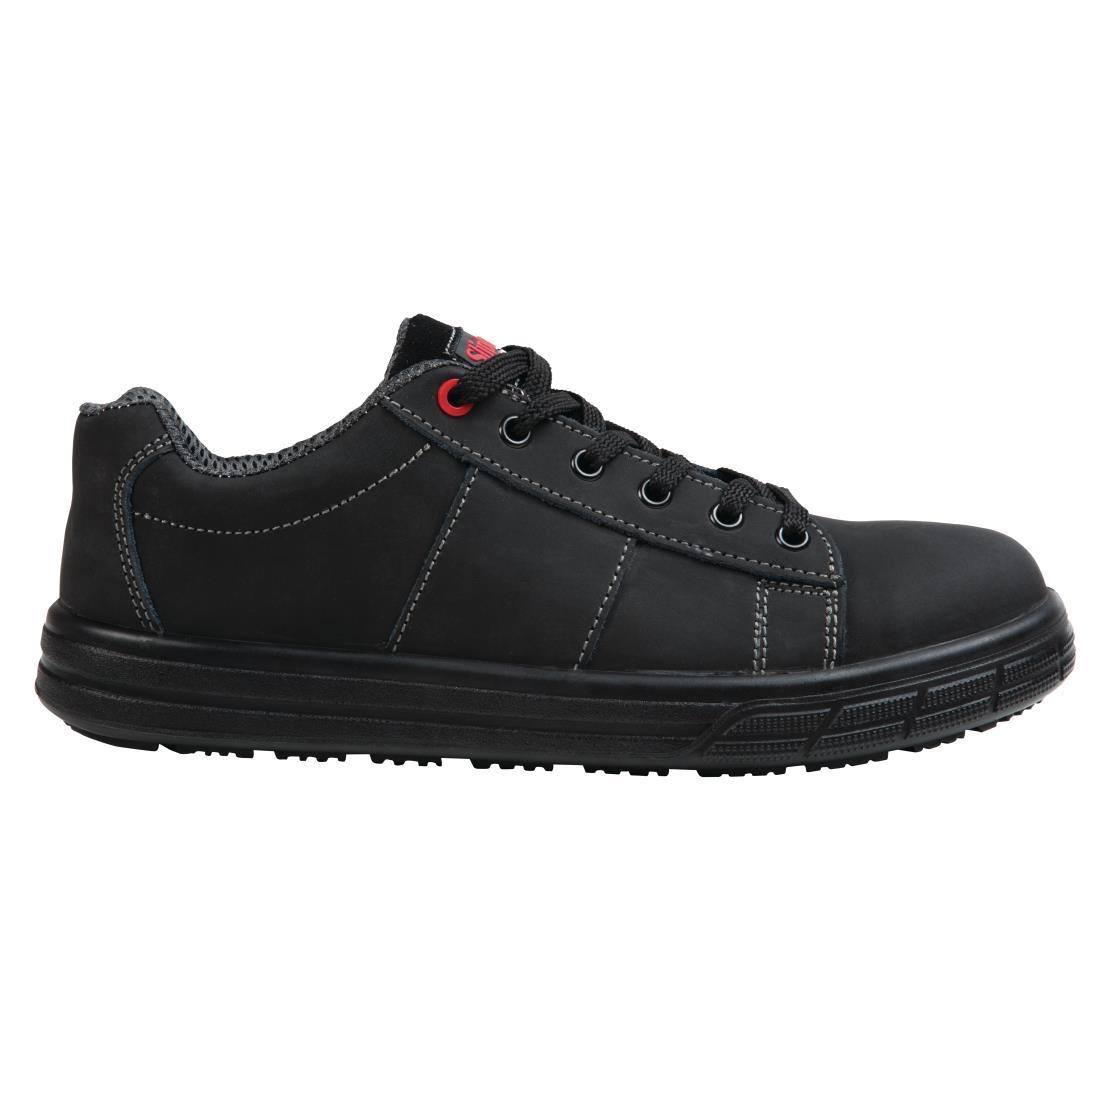 Slipbuster Safety Trainers Black 43 - BB420-43  - 5